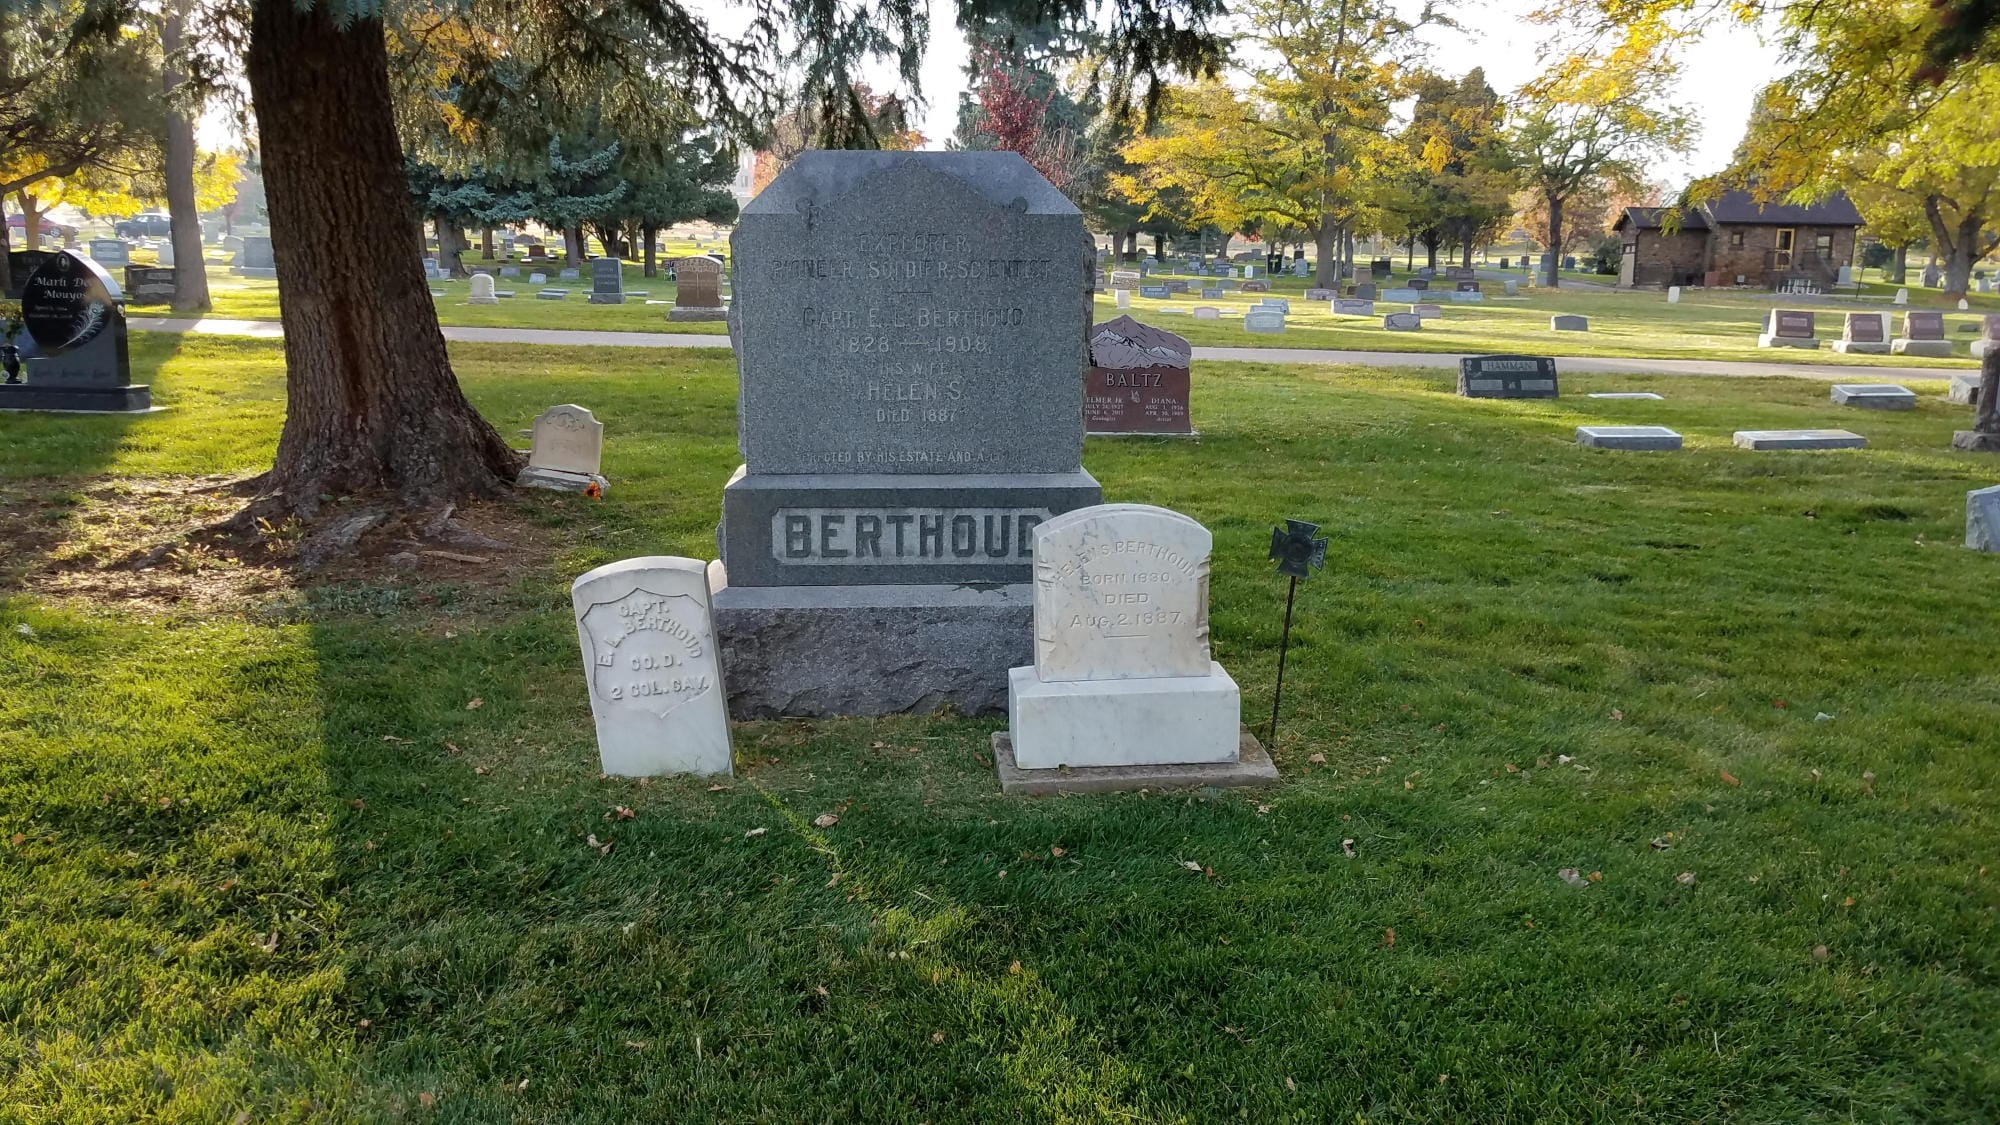 Large gray headstone saying "BERTHOUD" with two smaller white stones in front.  Cemetery in the background with leaves starting to change.